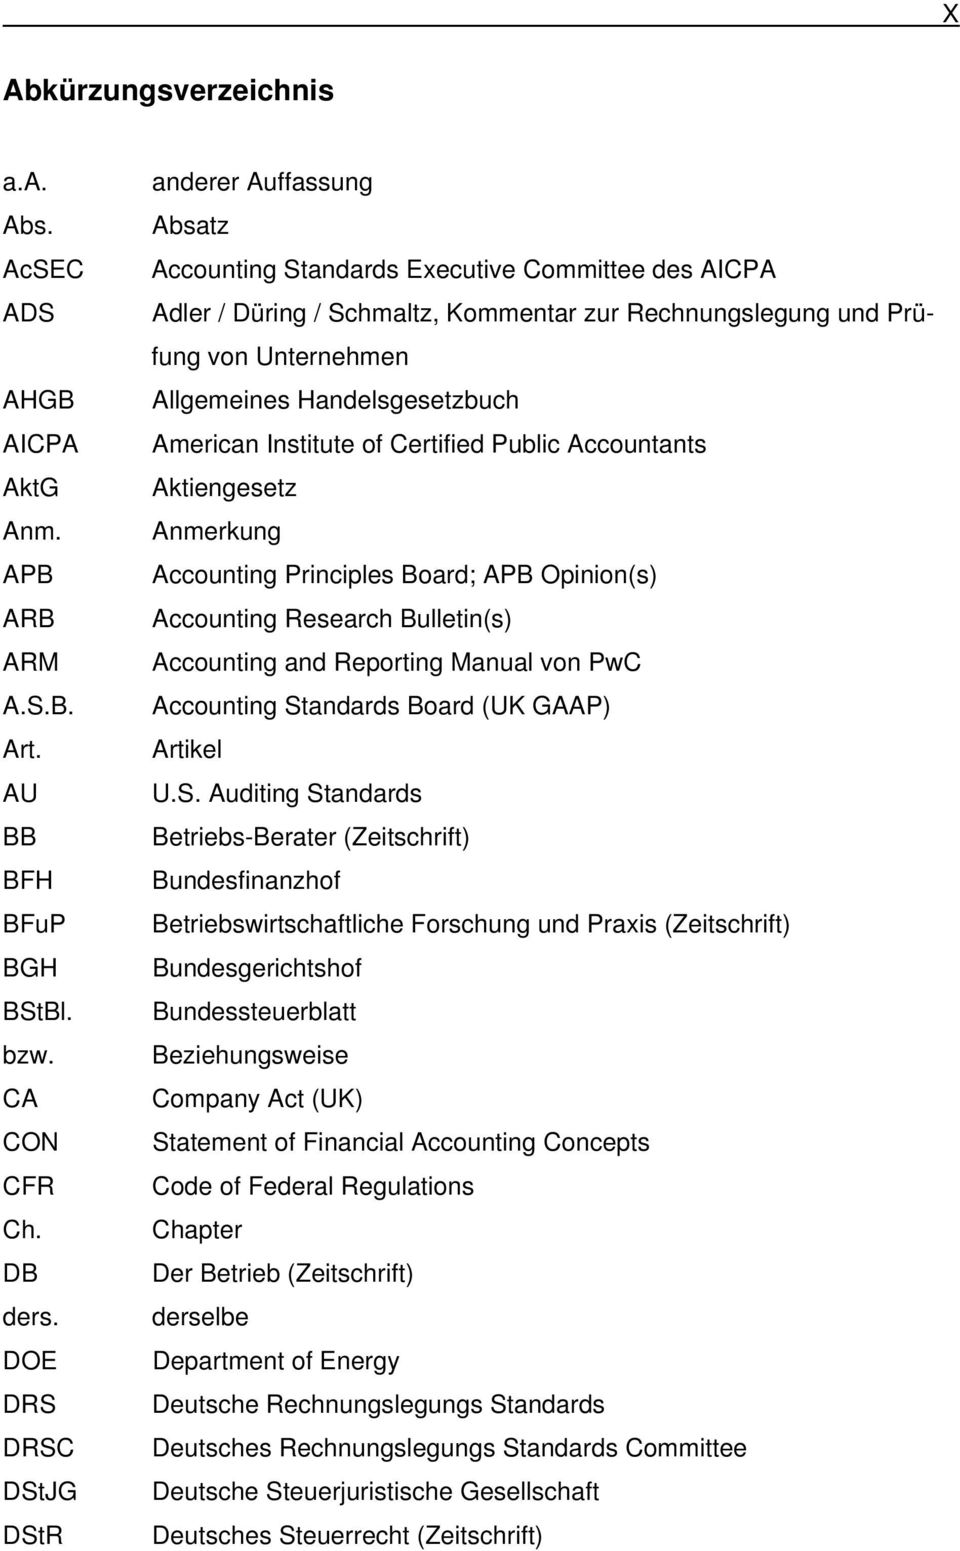 Handelsgesetzbuch American Institute of Certified Public Accountants Aktiengesetz Anmerkung Accounting Principles Board; APB Opinion(s) Accounting Research Bulletin(s) Accounting and Reporting Manual